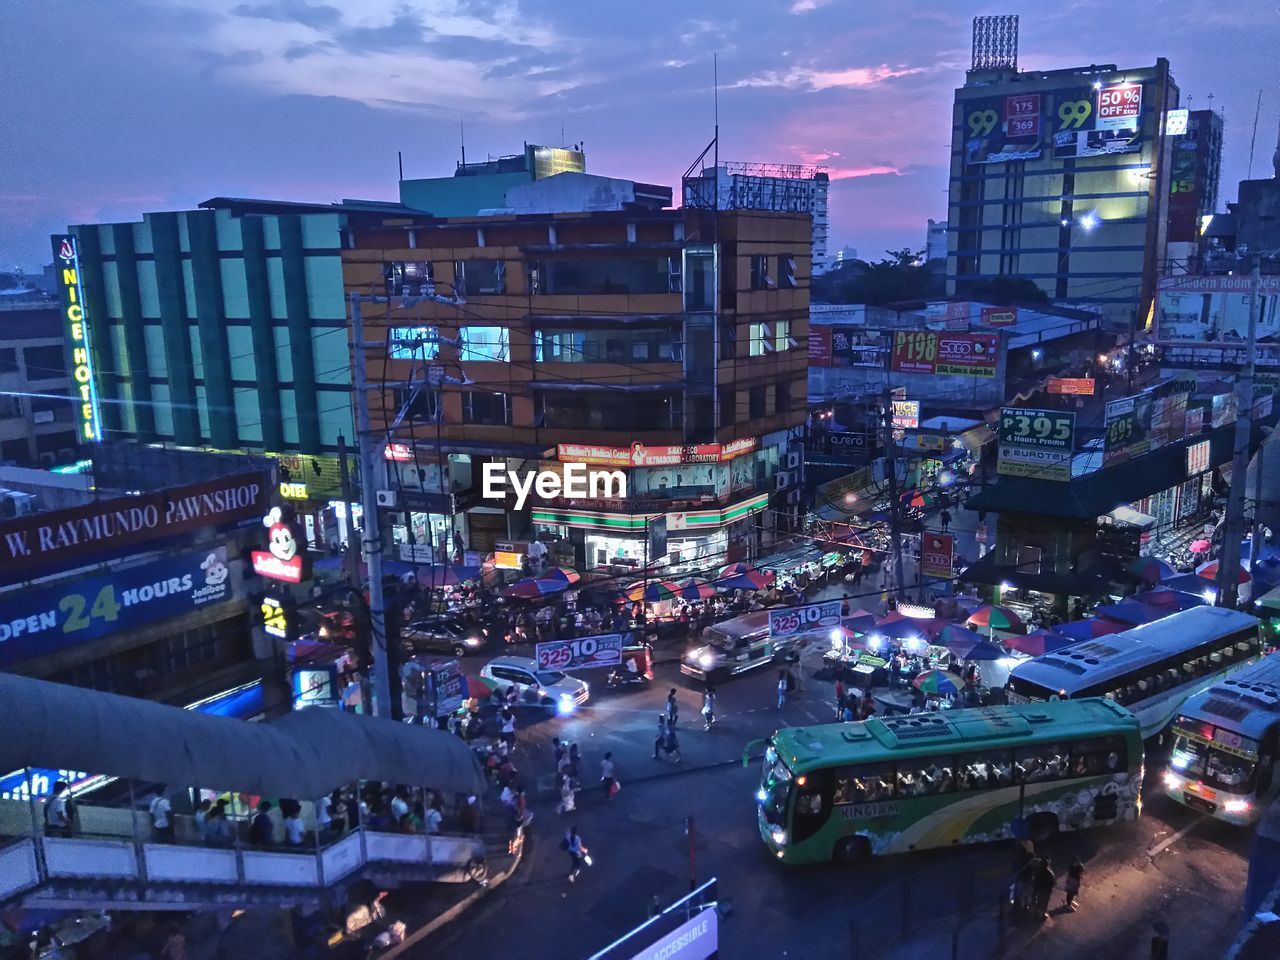 High angle view of vehicles and crowd on street by buildings at dusk in city